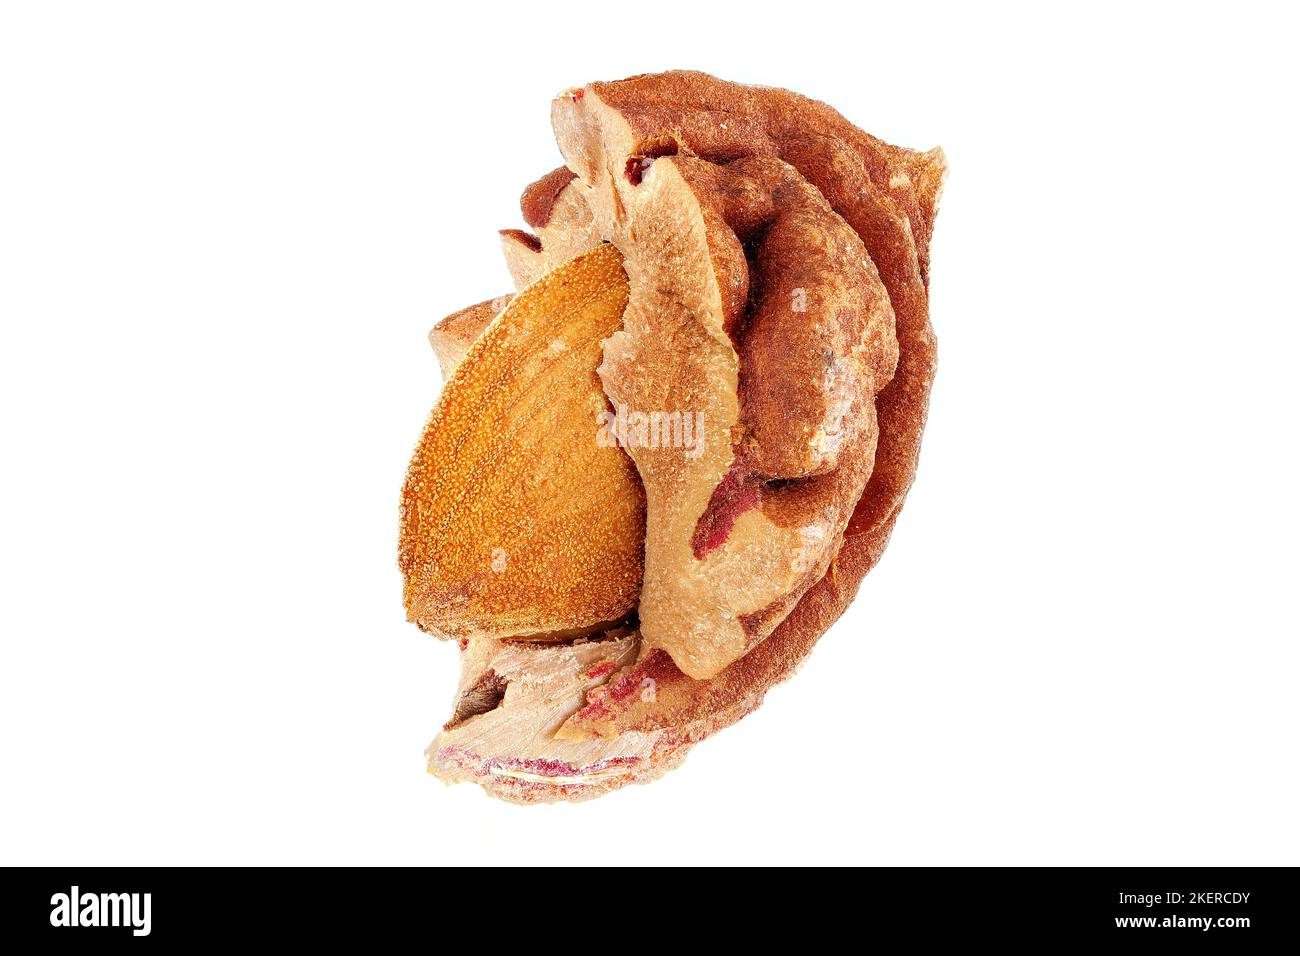 Prunus persica, Peach, Pfirsich, close up, broken stone with seed inside Stock Photo